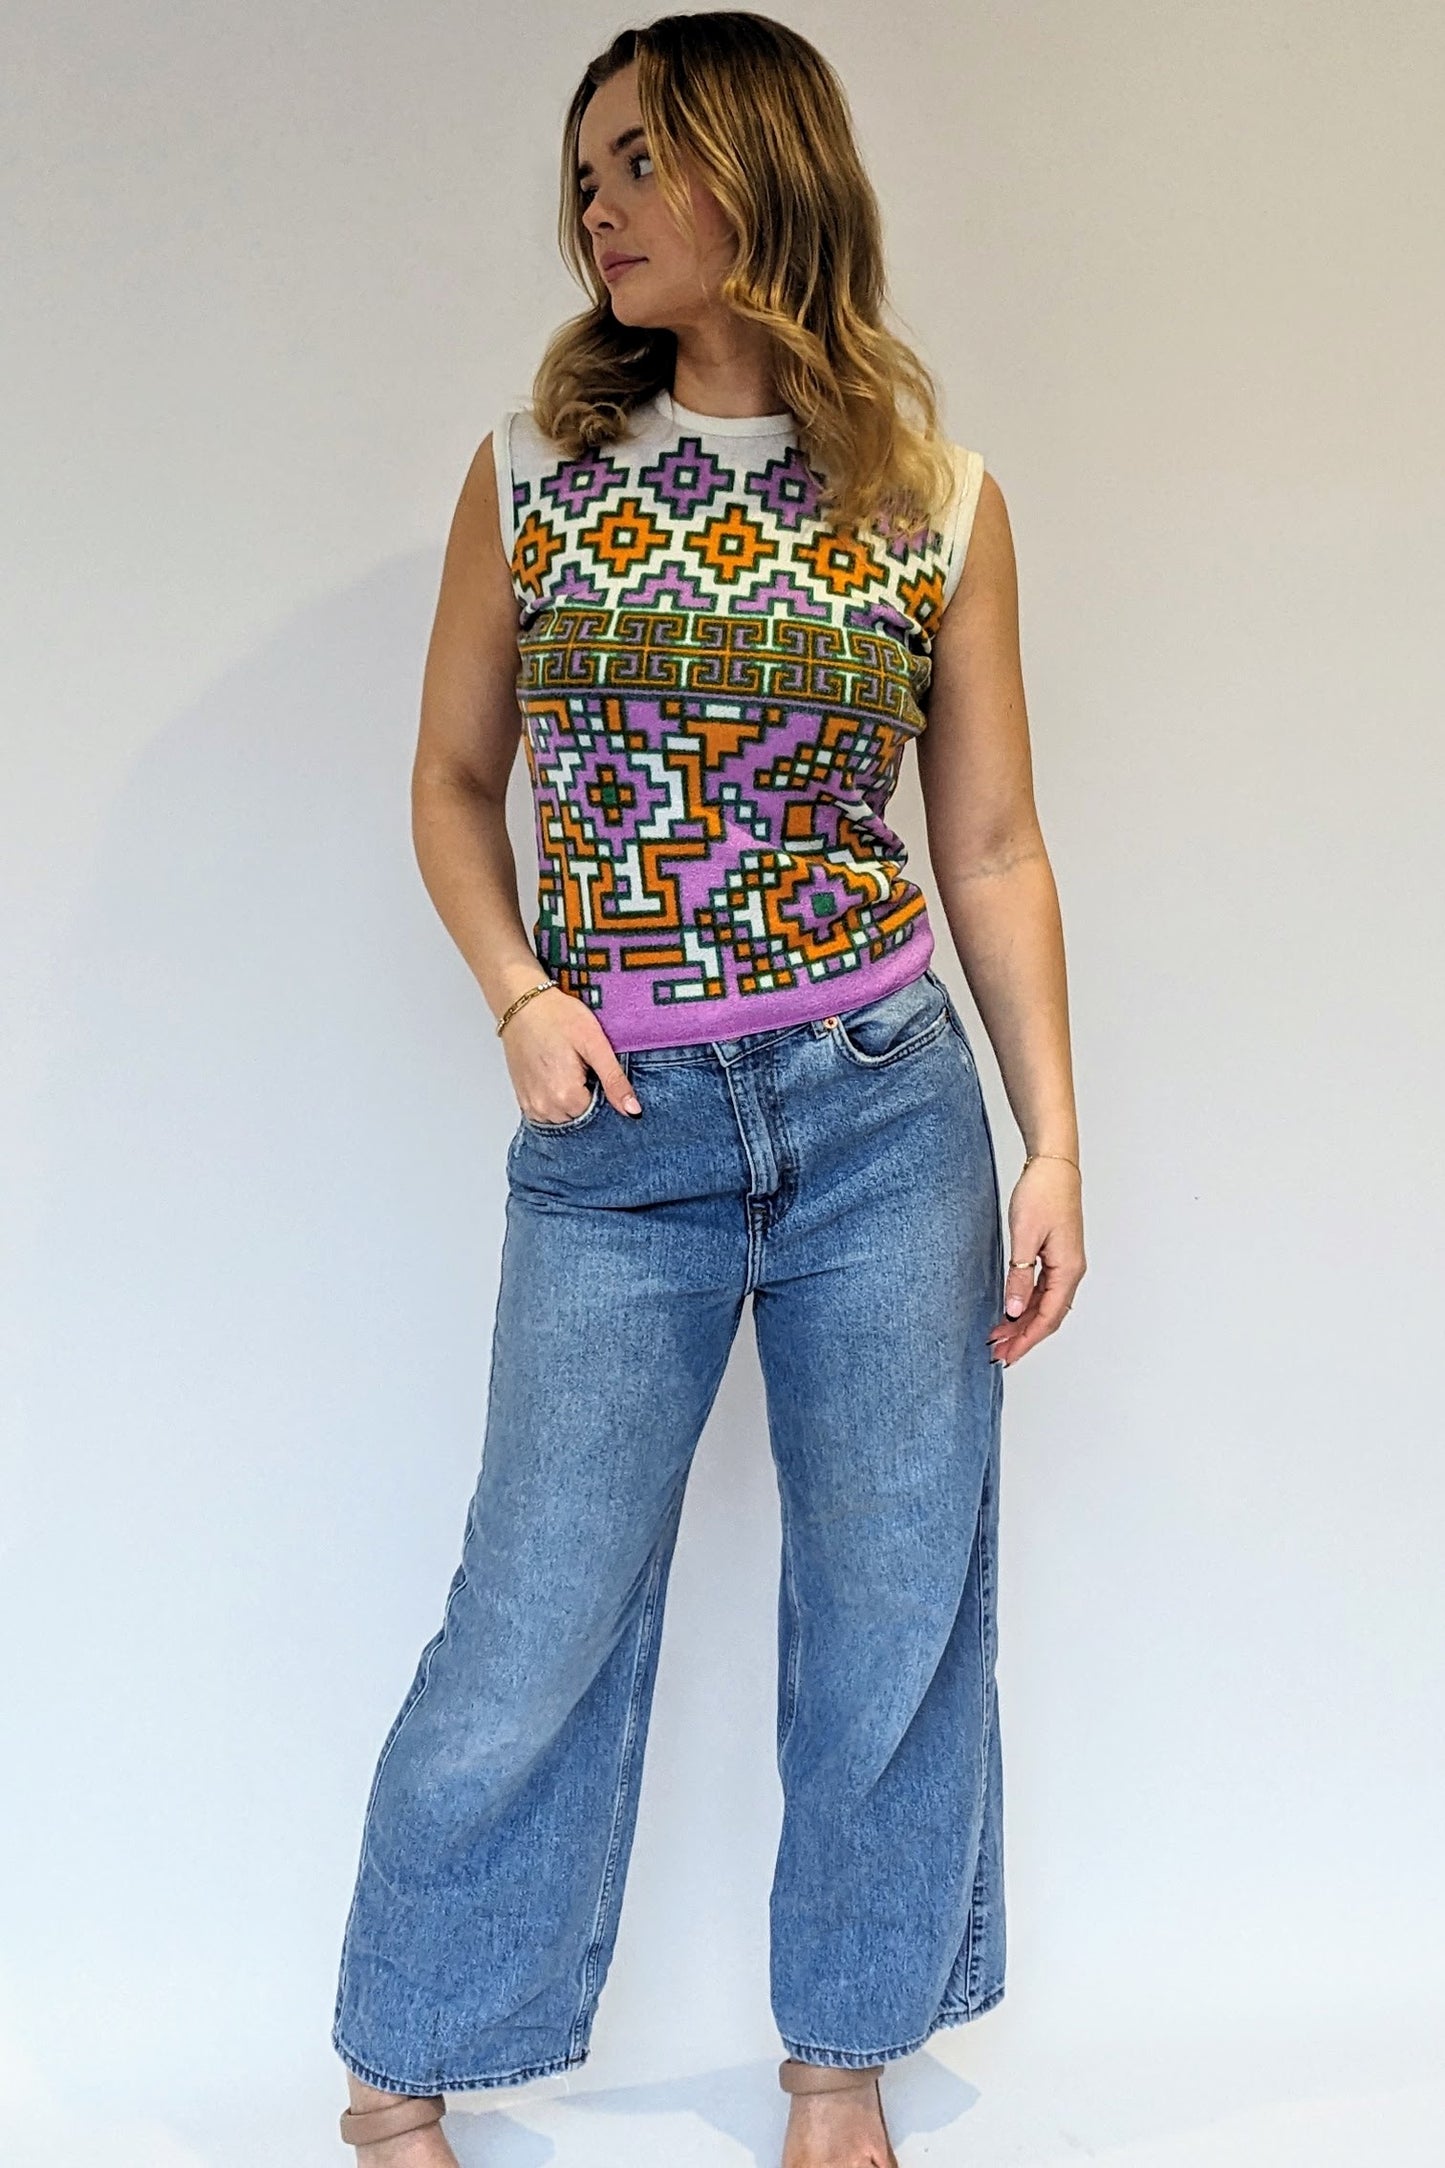 1970s short top with geometric pattern in green, orange and purple